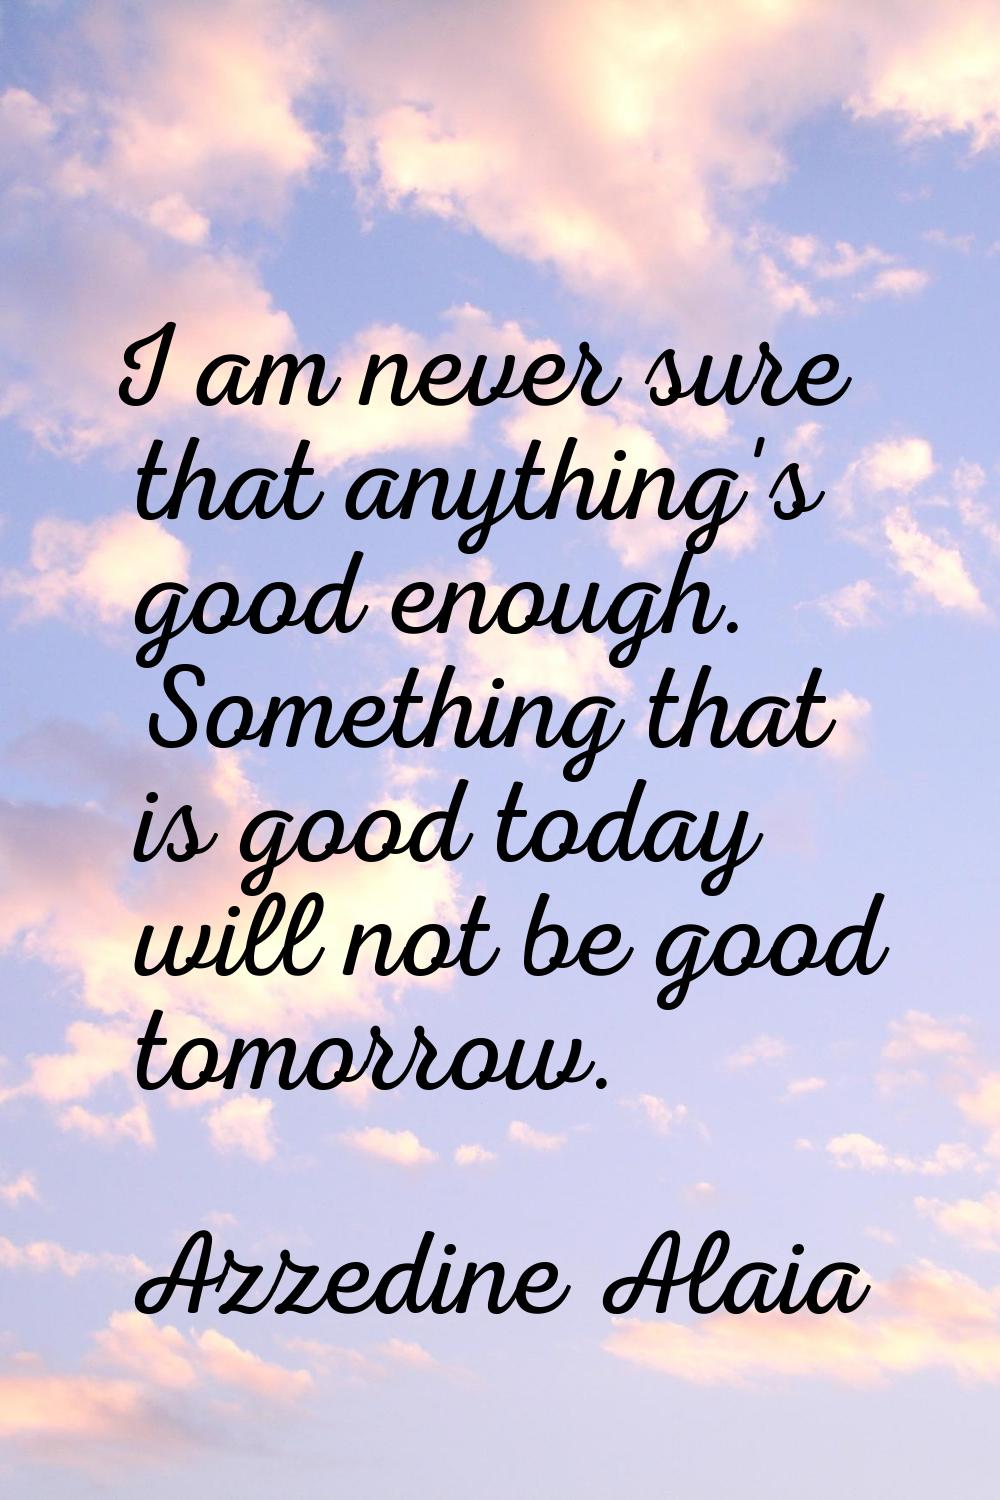 I am never sure that anything's good enough. Something that is good today will not be good tomorrow